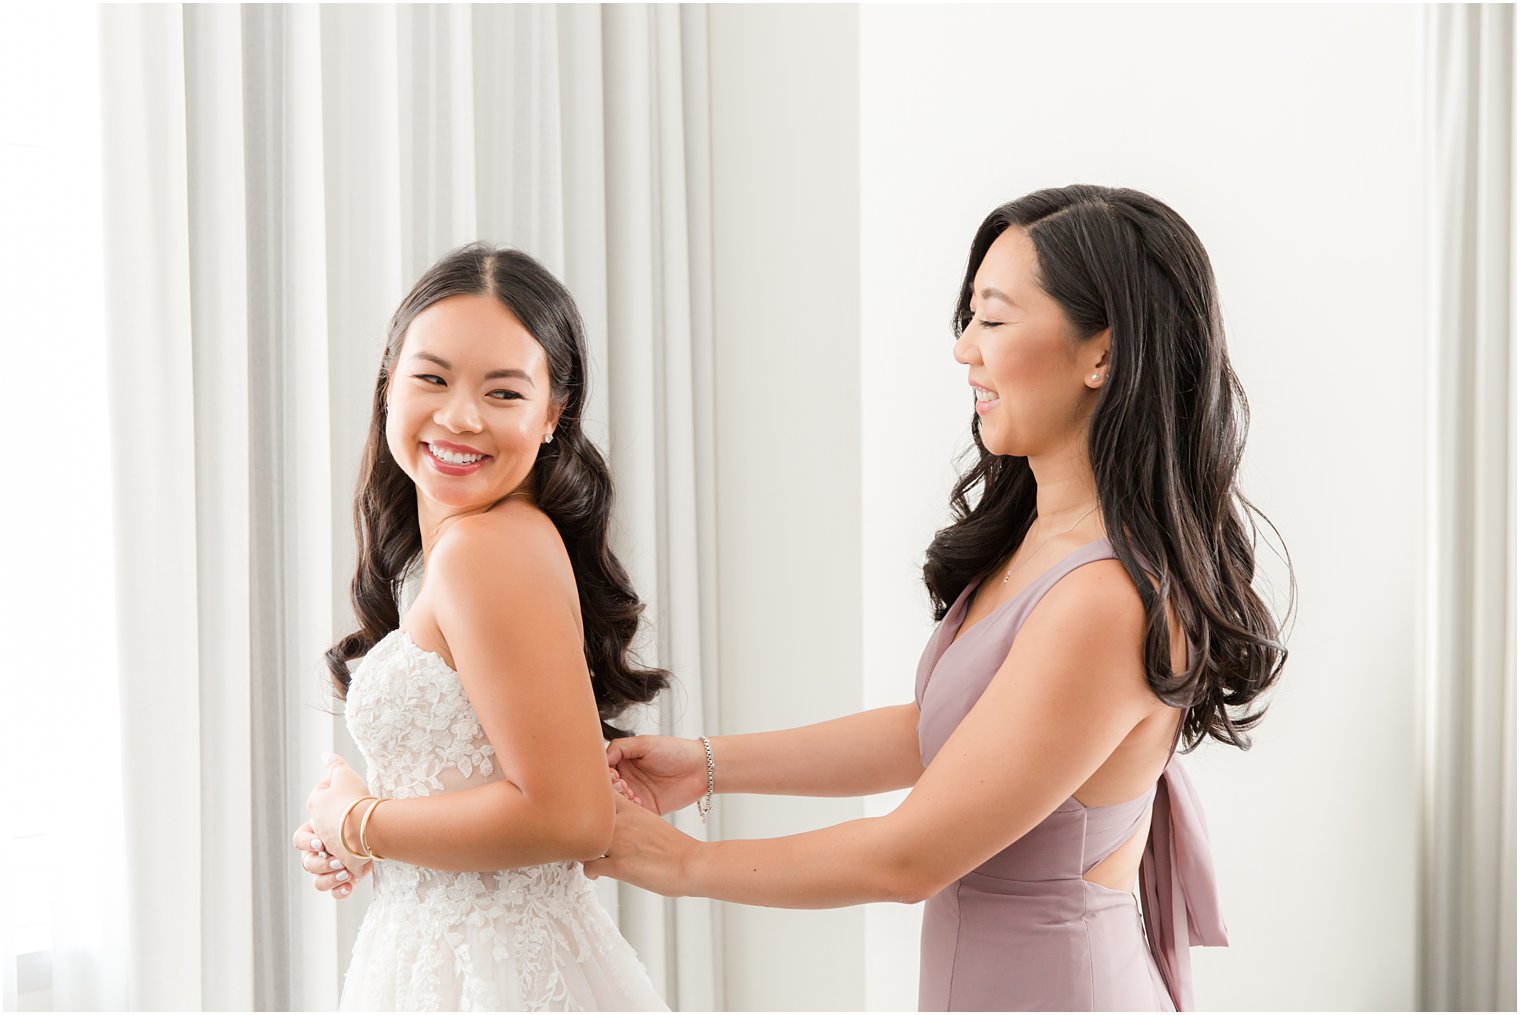 bridesmaid in mauve gown helps bride with wedding dress